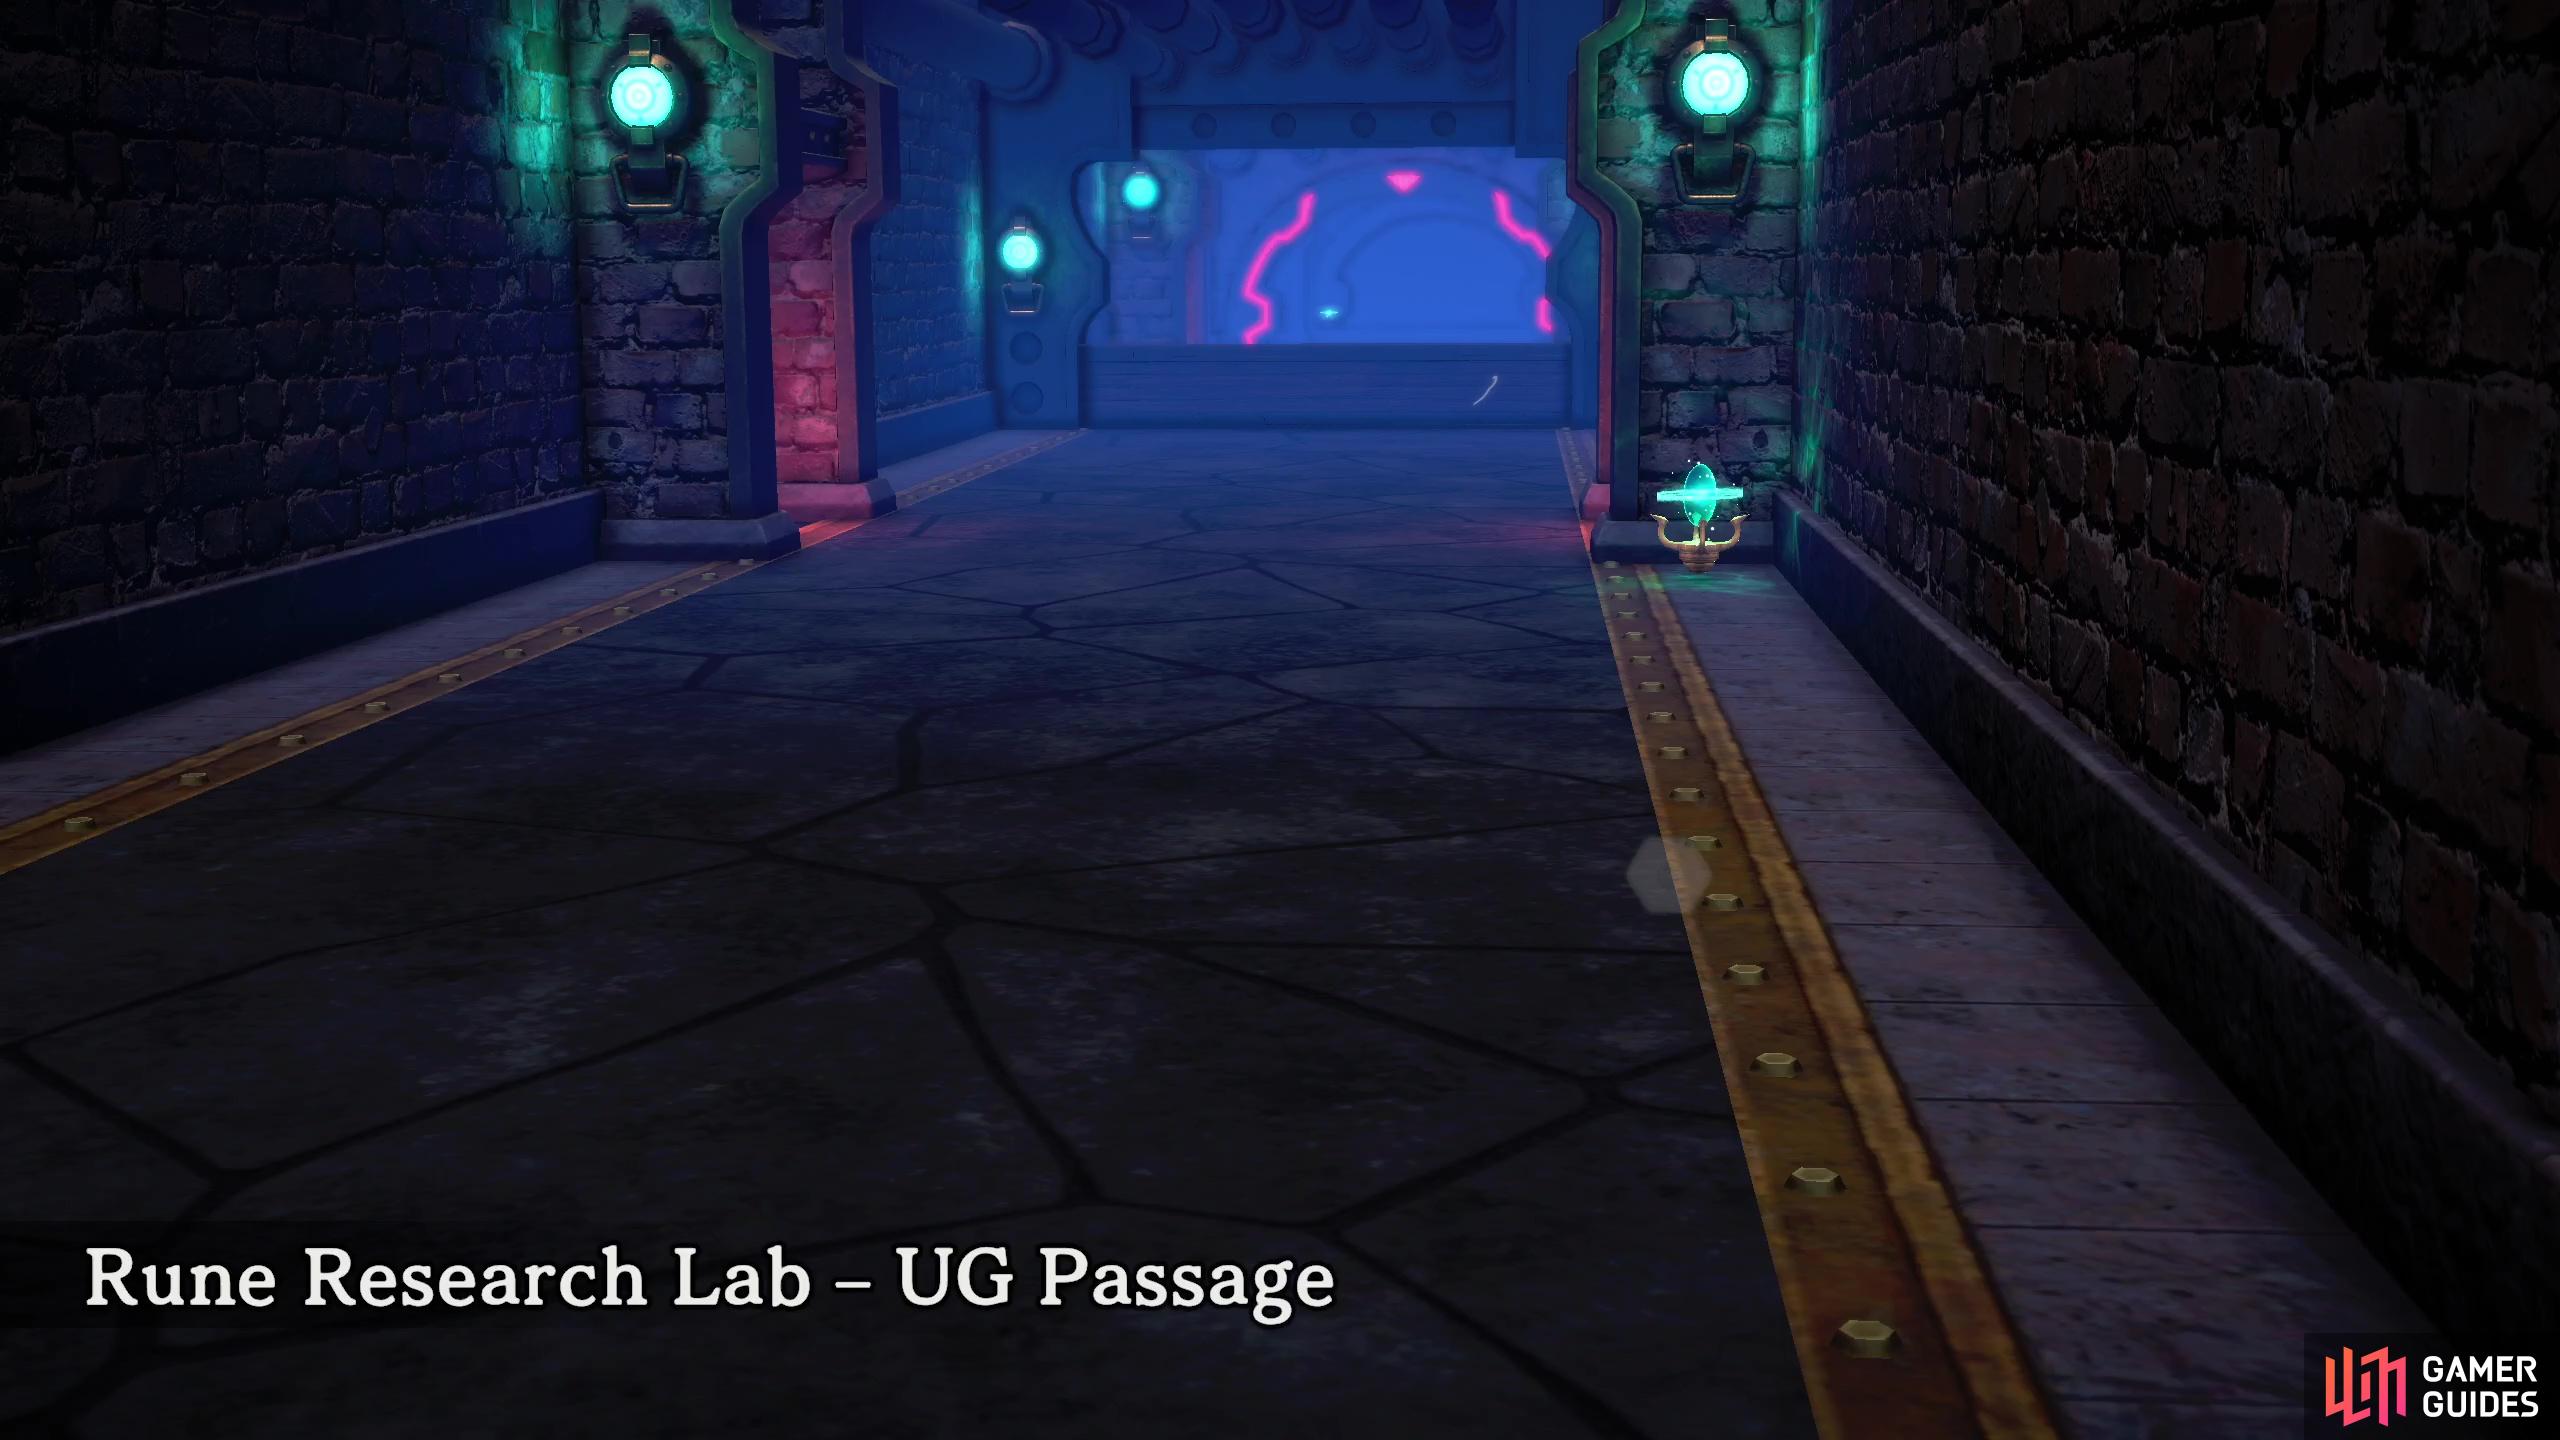 The Rune Research Lab UG Passage will occur during the Imperish’arc portion of the story.